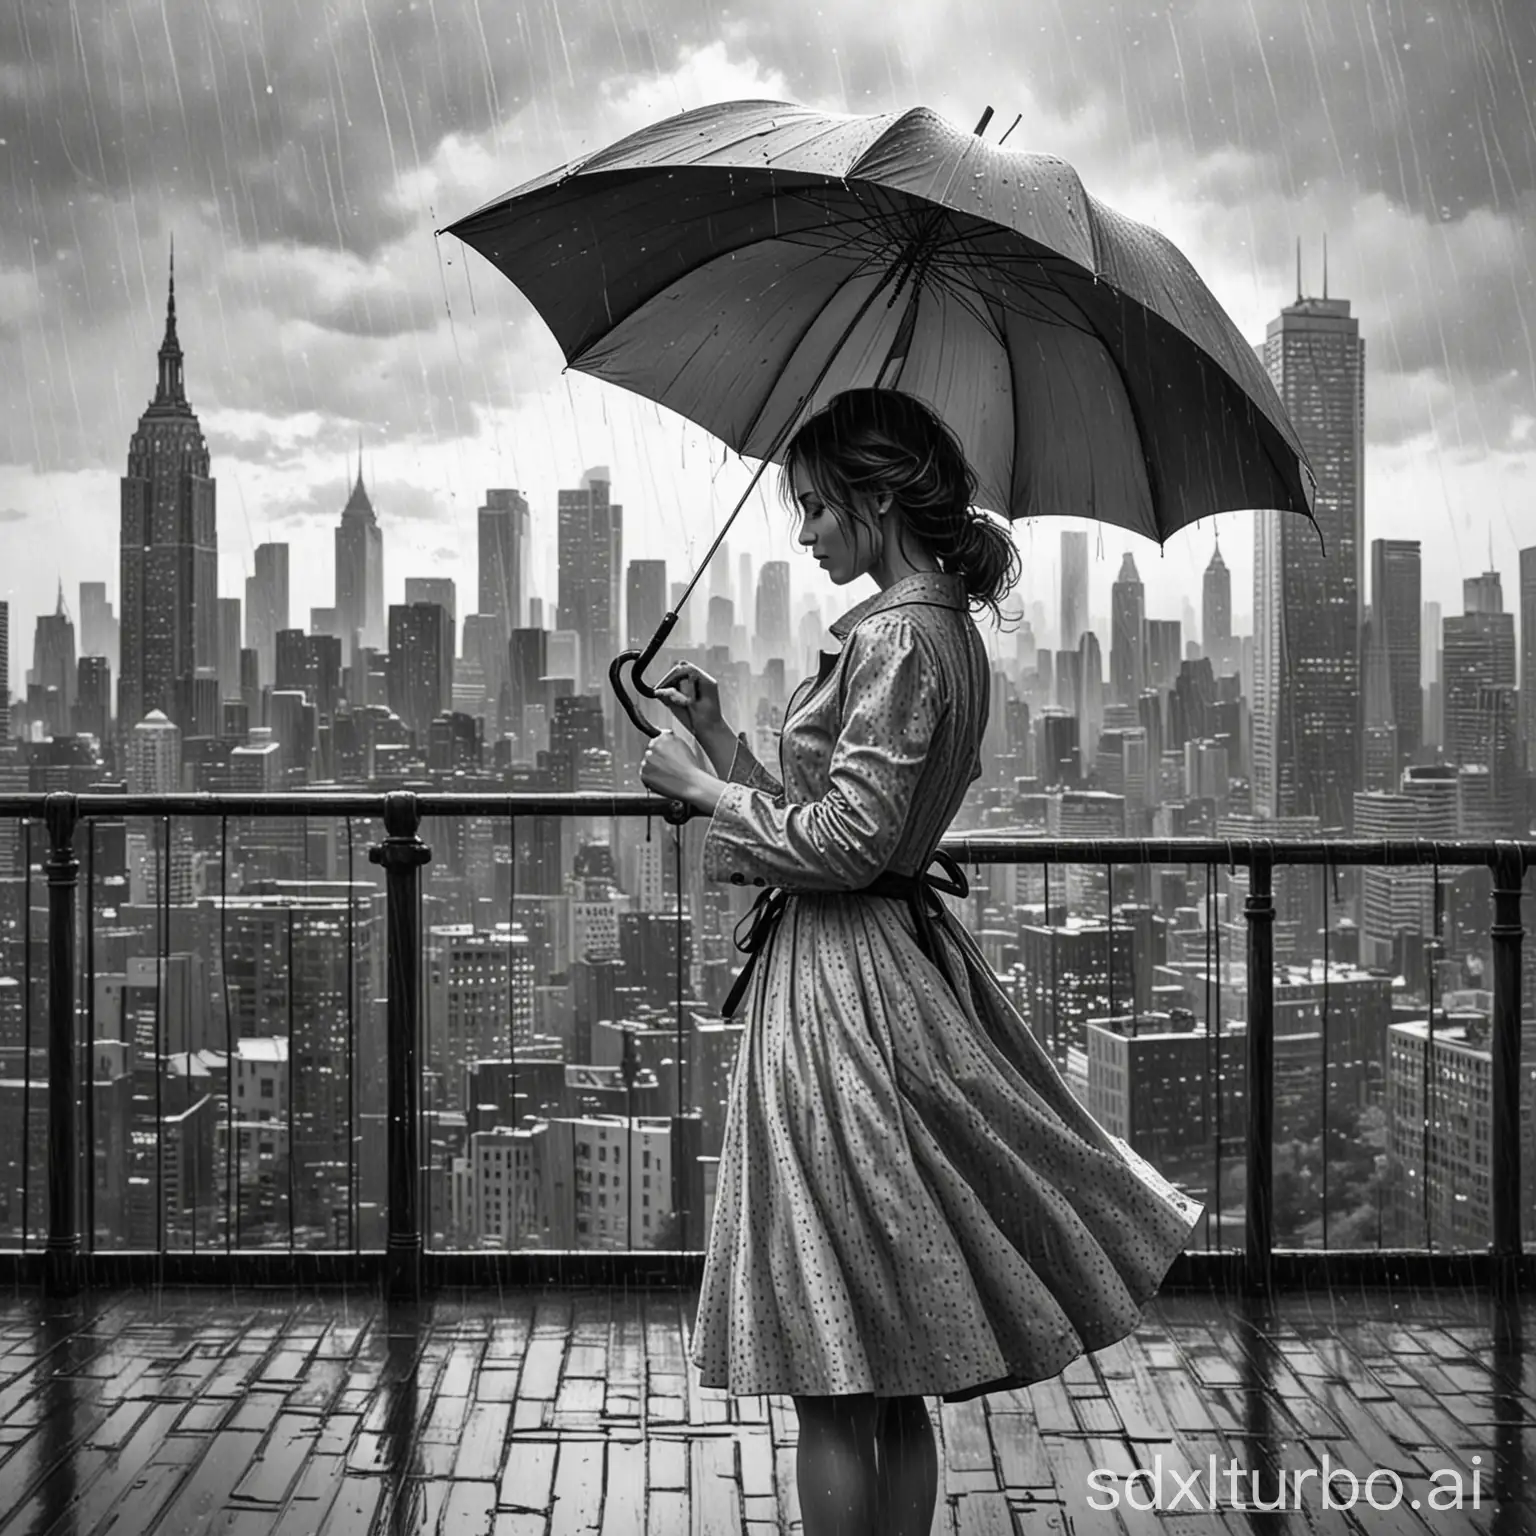 Line Art, black and white, woman with dress and umbrella, rainy day in the city, skyline